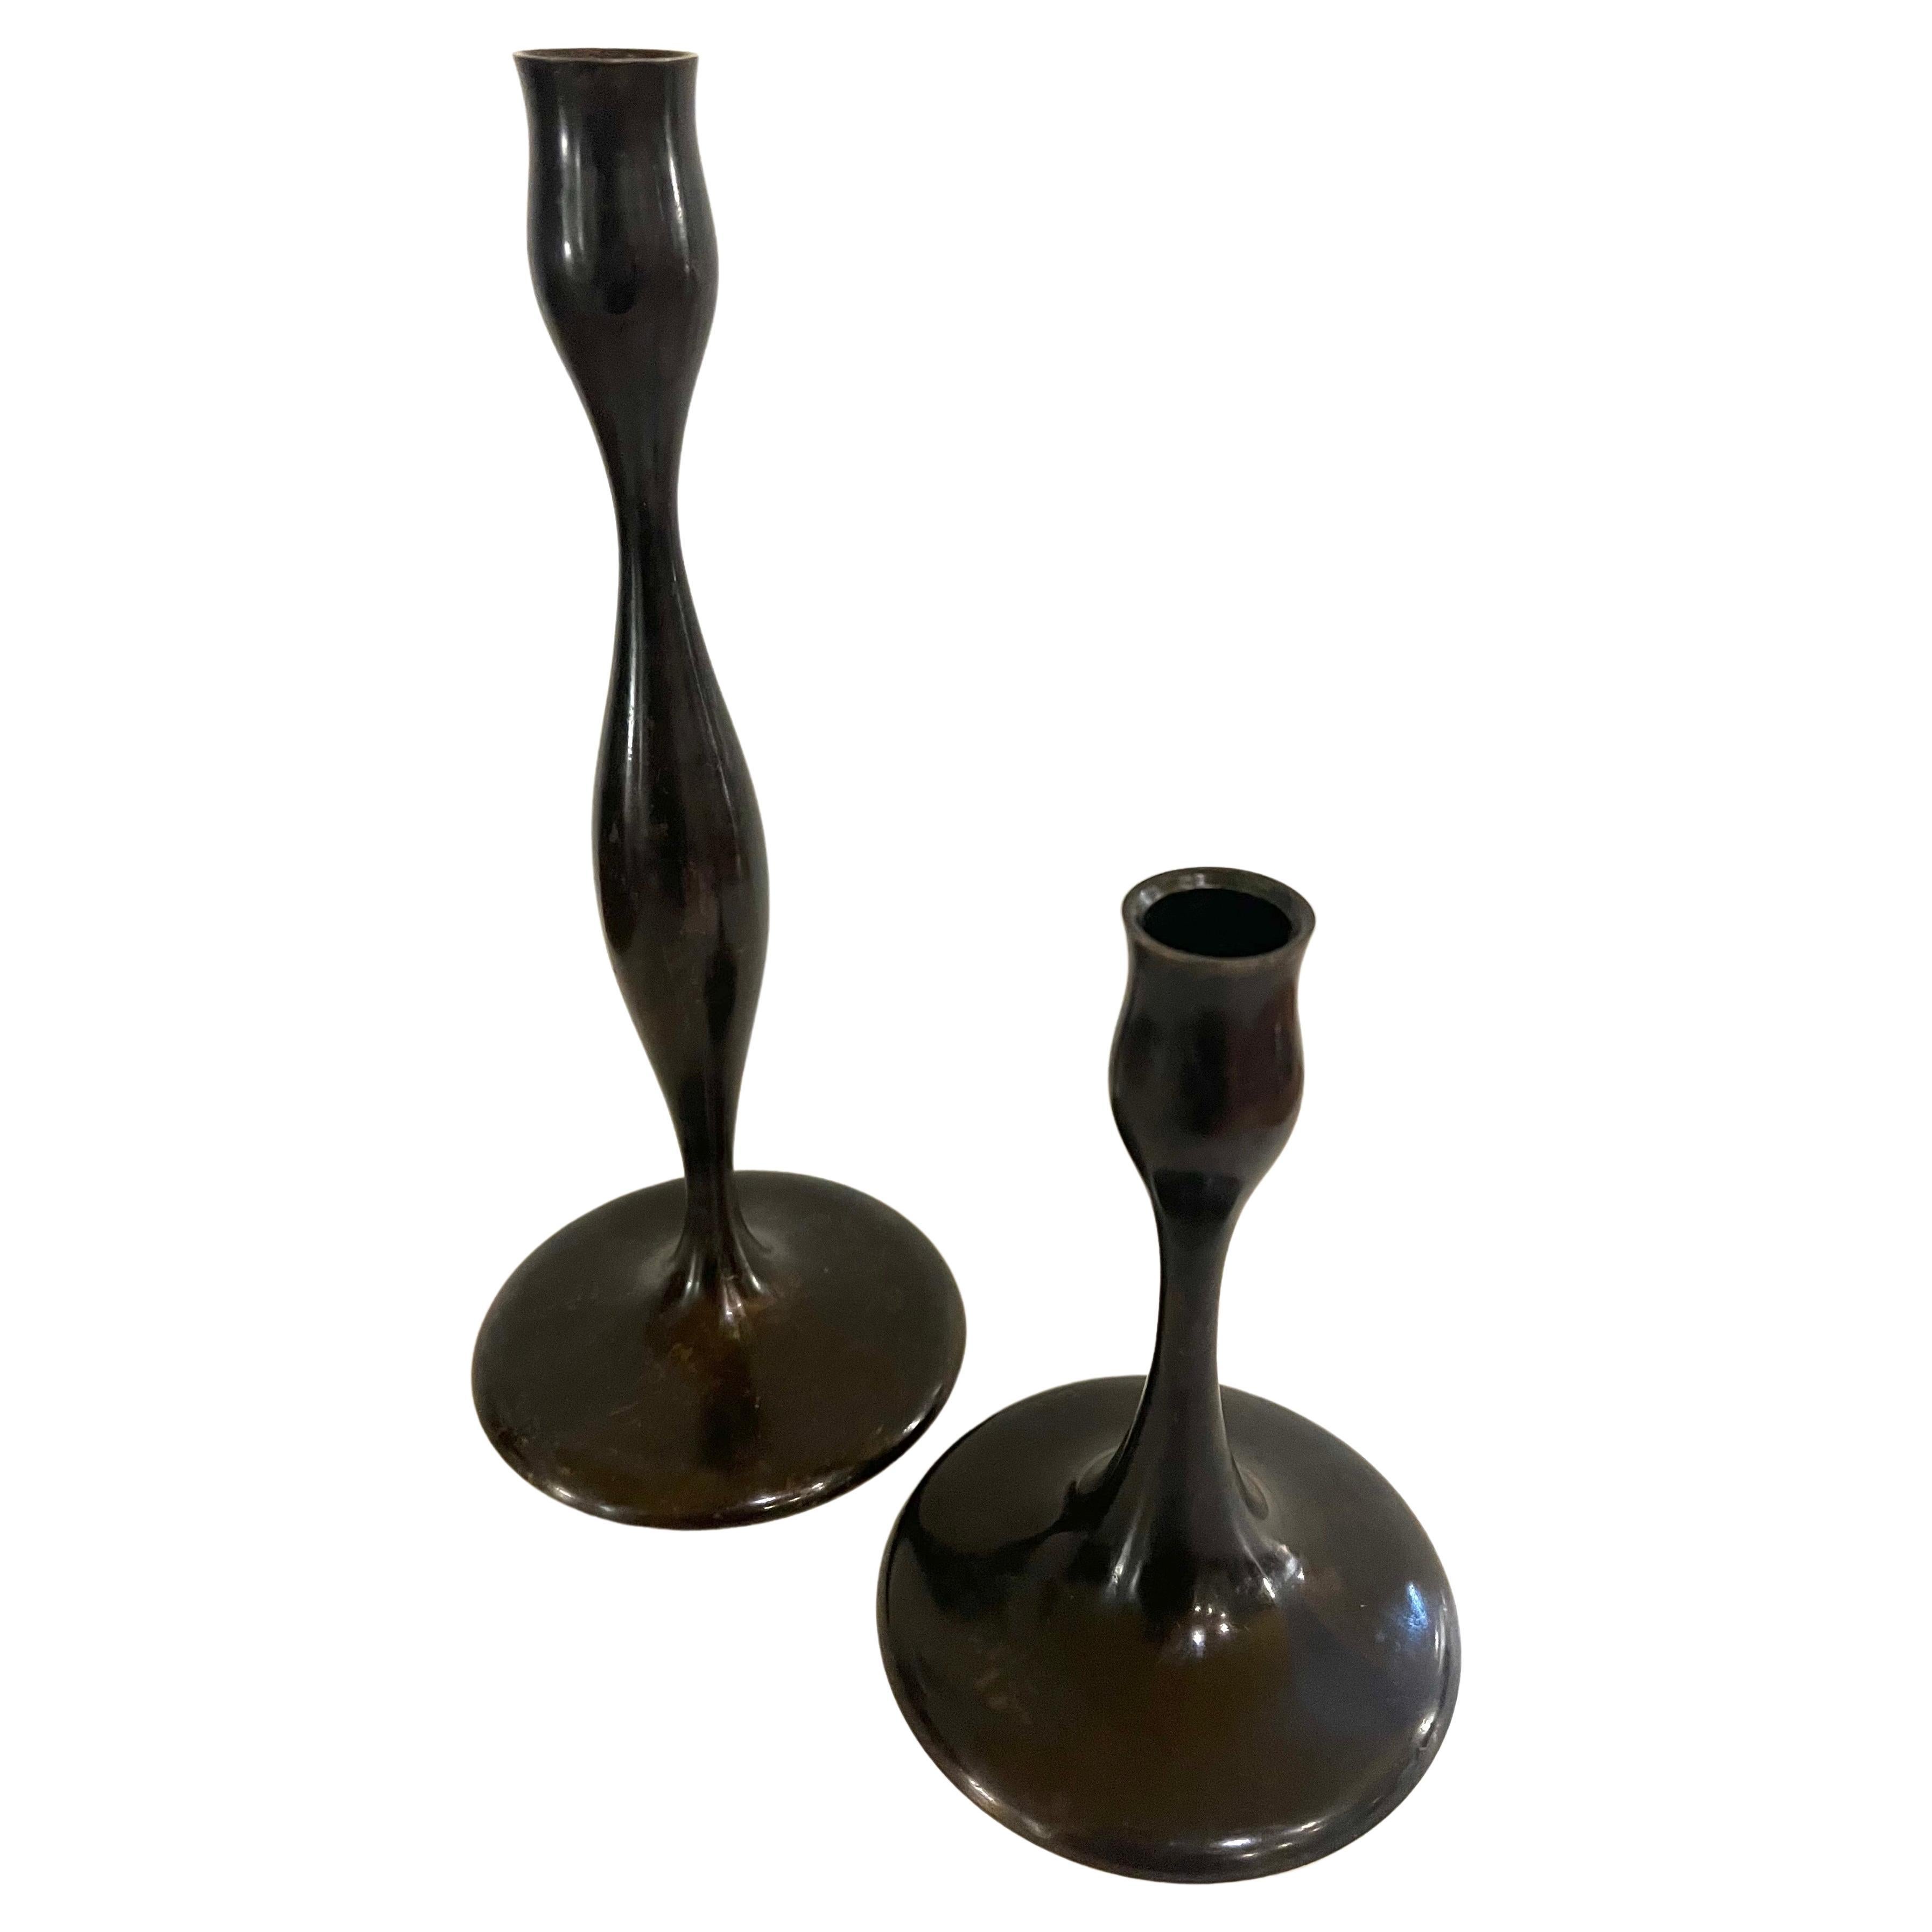 Scandinavian Modern Pair of Solid Patinated Bronze Sculptural Candle holders Signed by Eva Zeisel